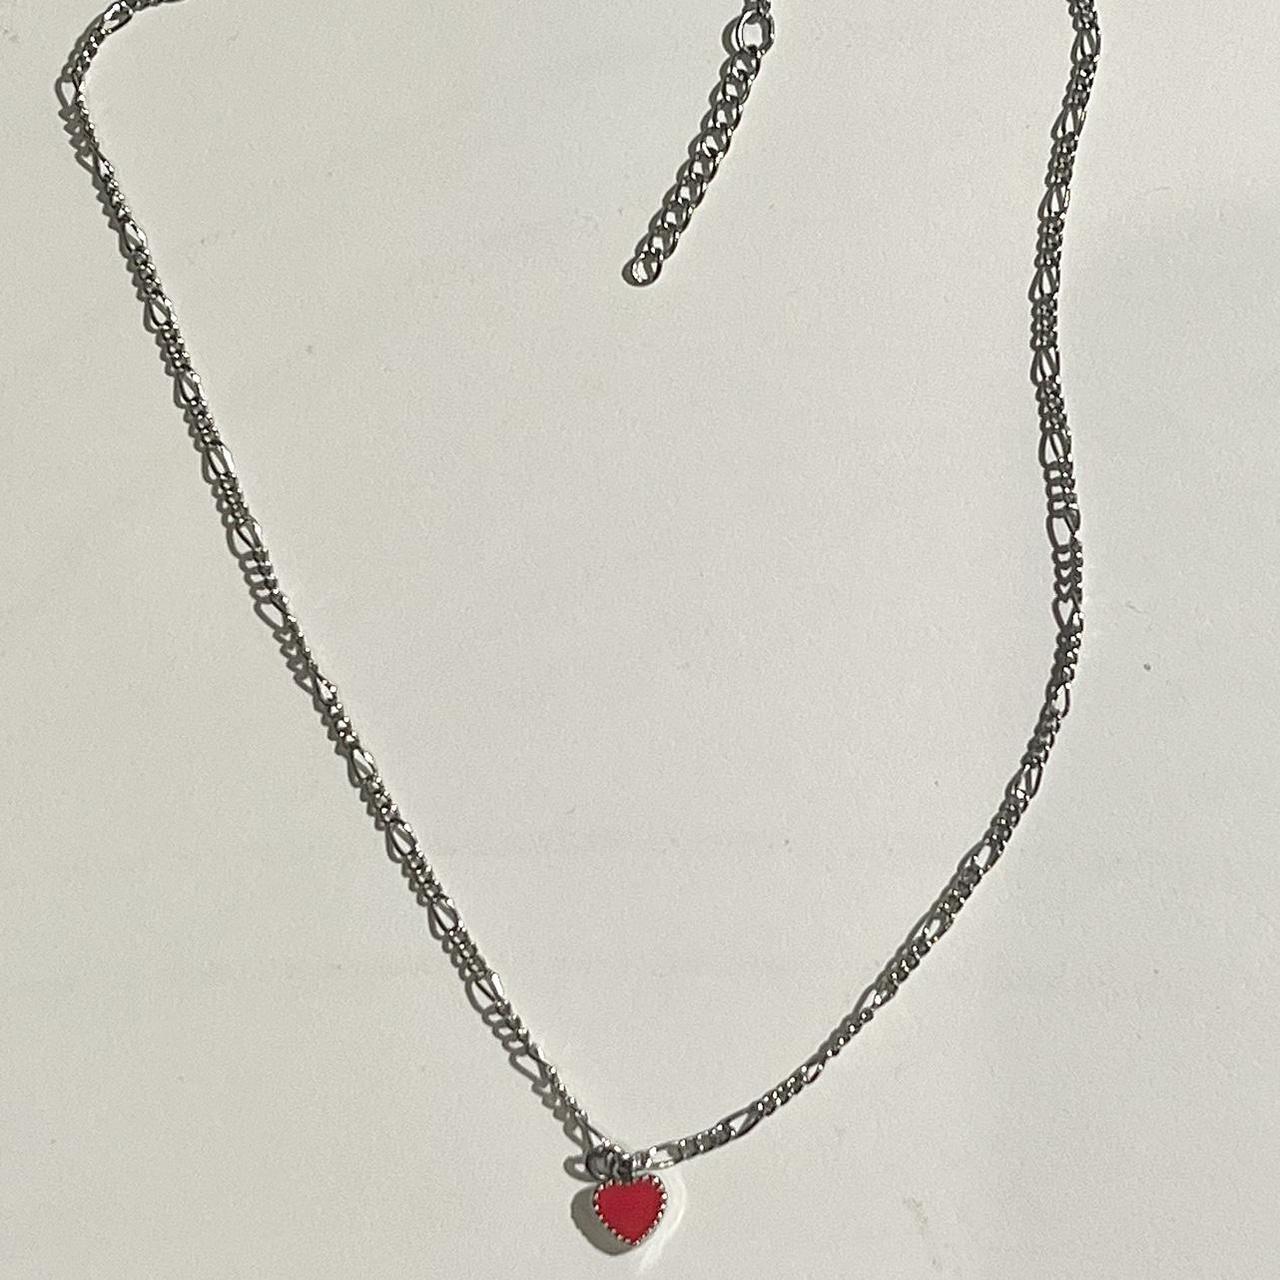 Brandy Melville Red Heart Necklace